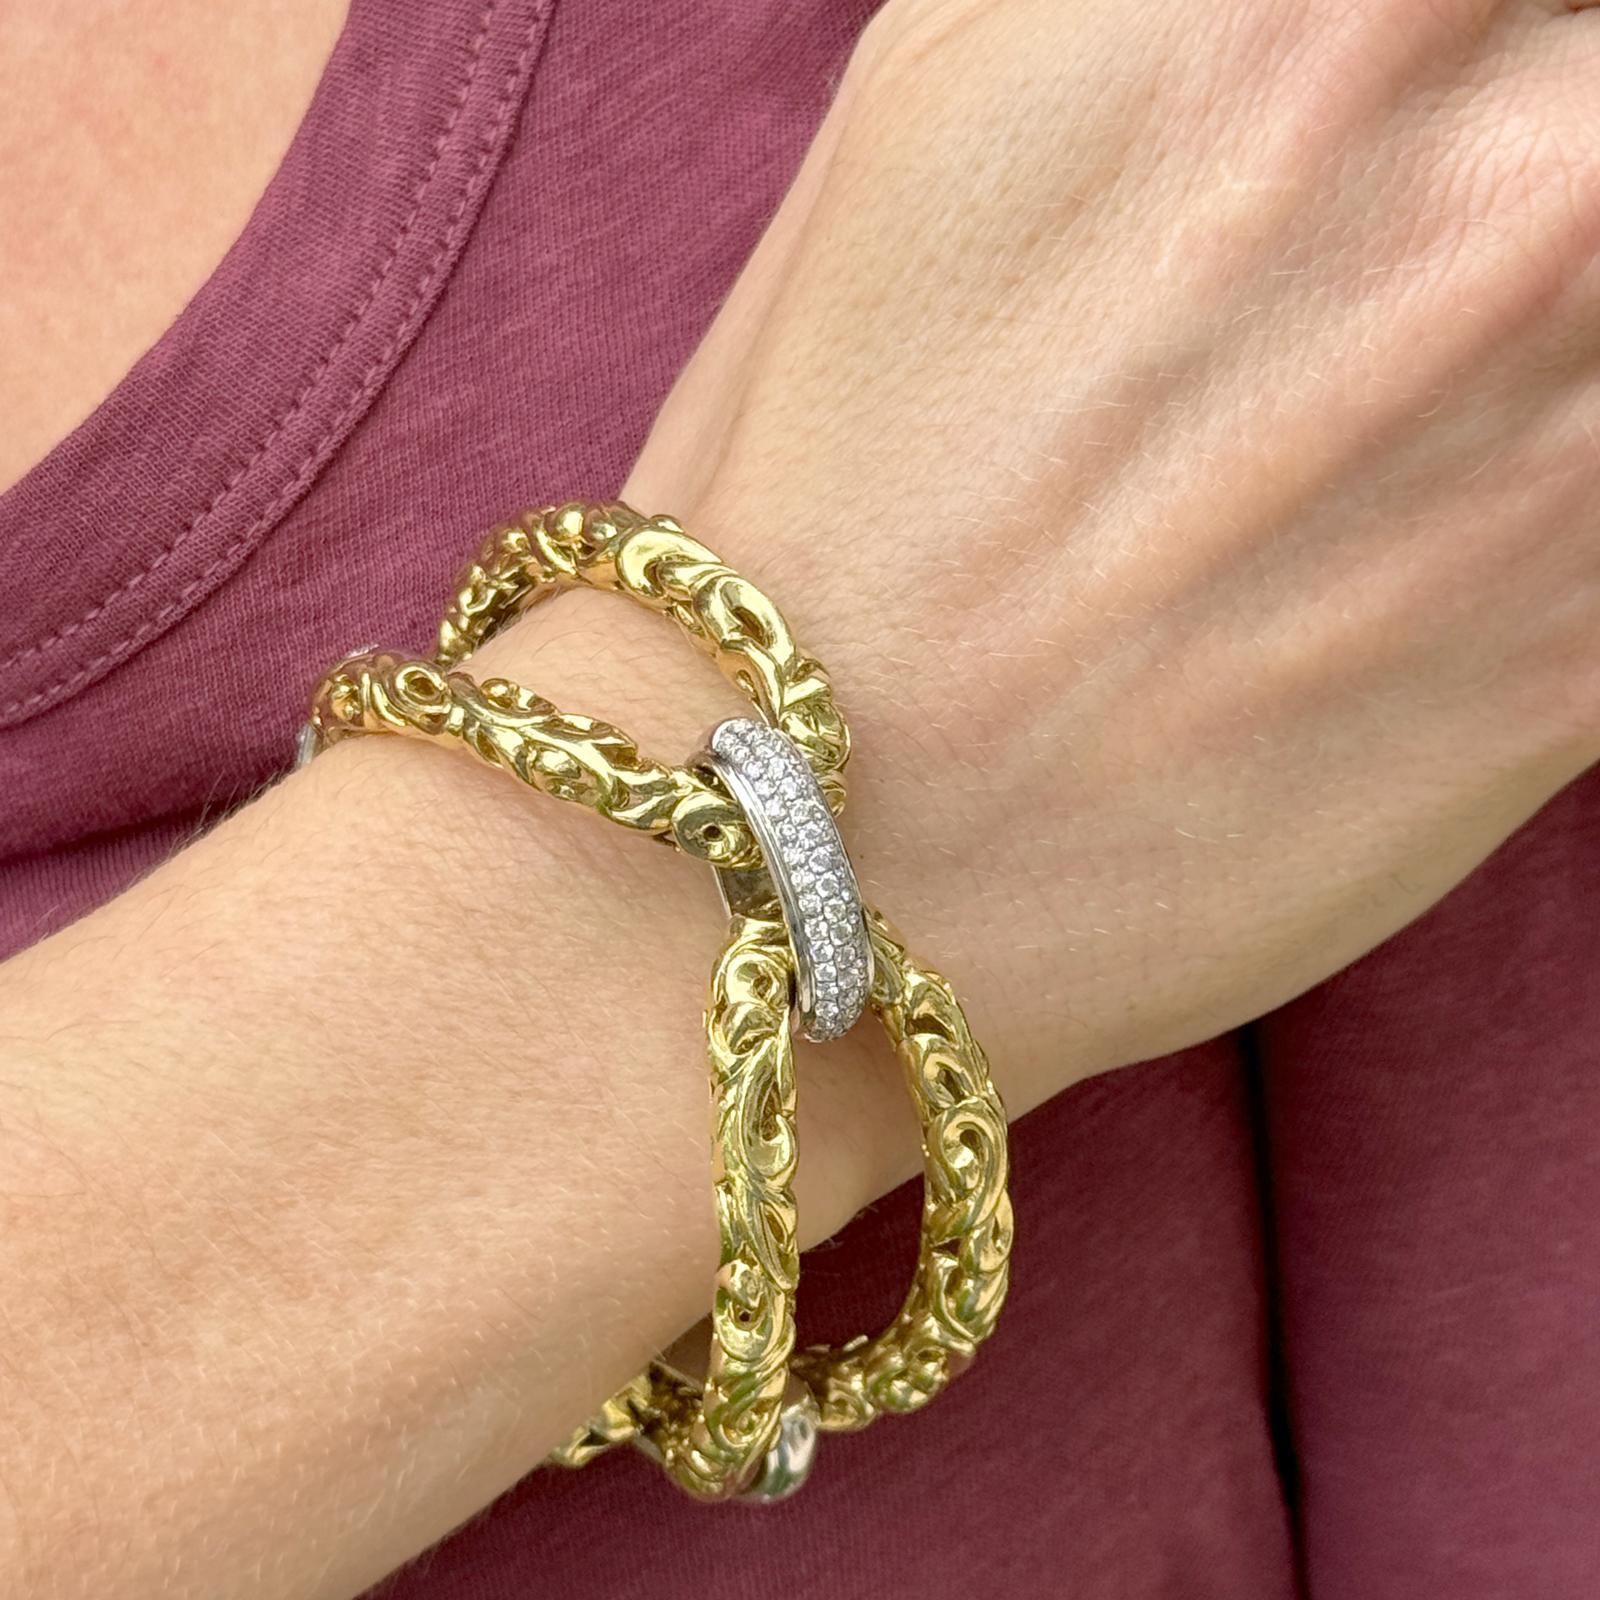 Large oval link diamond bracelet by designer Charles Krypell. The bracelet is crafted in 18 karat gold and features three stations set with 57 round brilliant cut diamonds weighing approximately 1.85 carat total weight. The diamonds are graded F-G